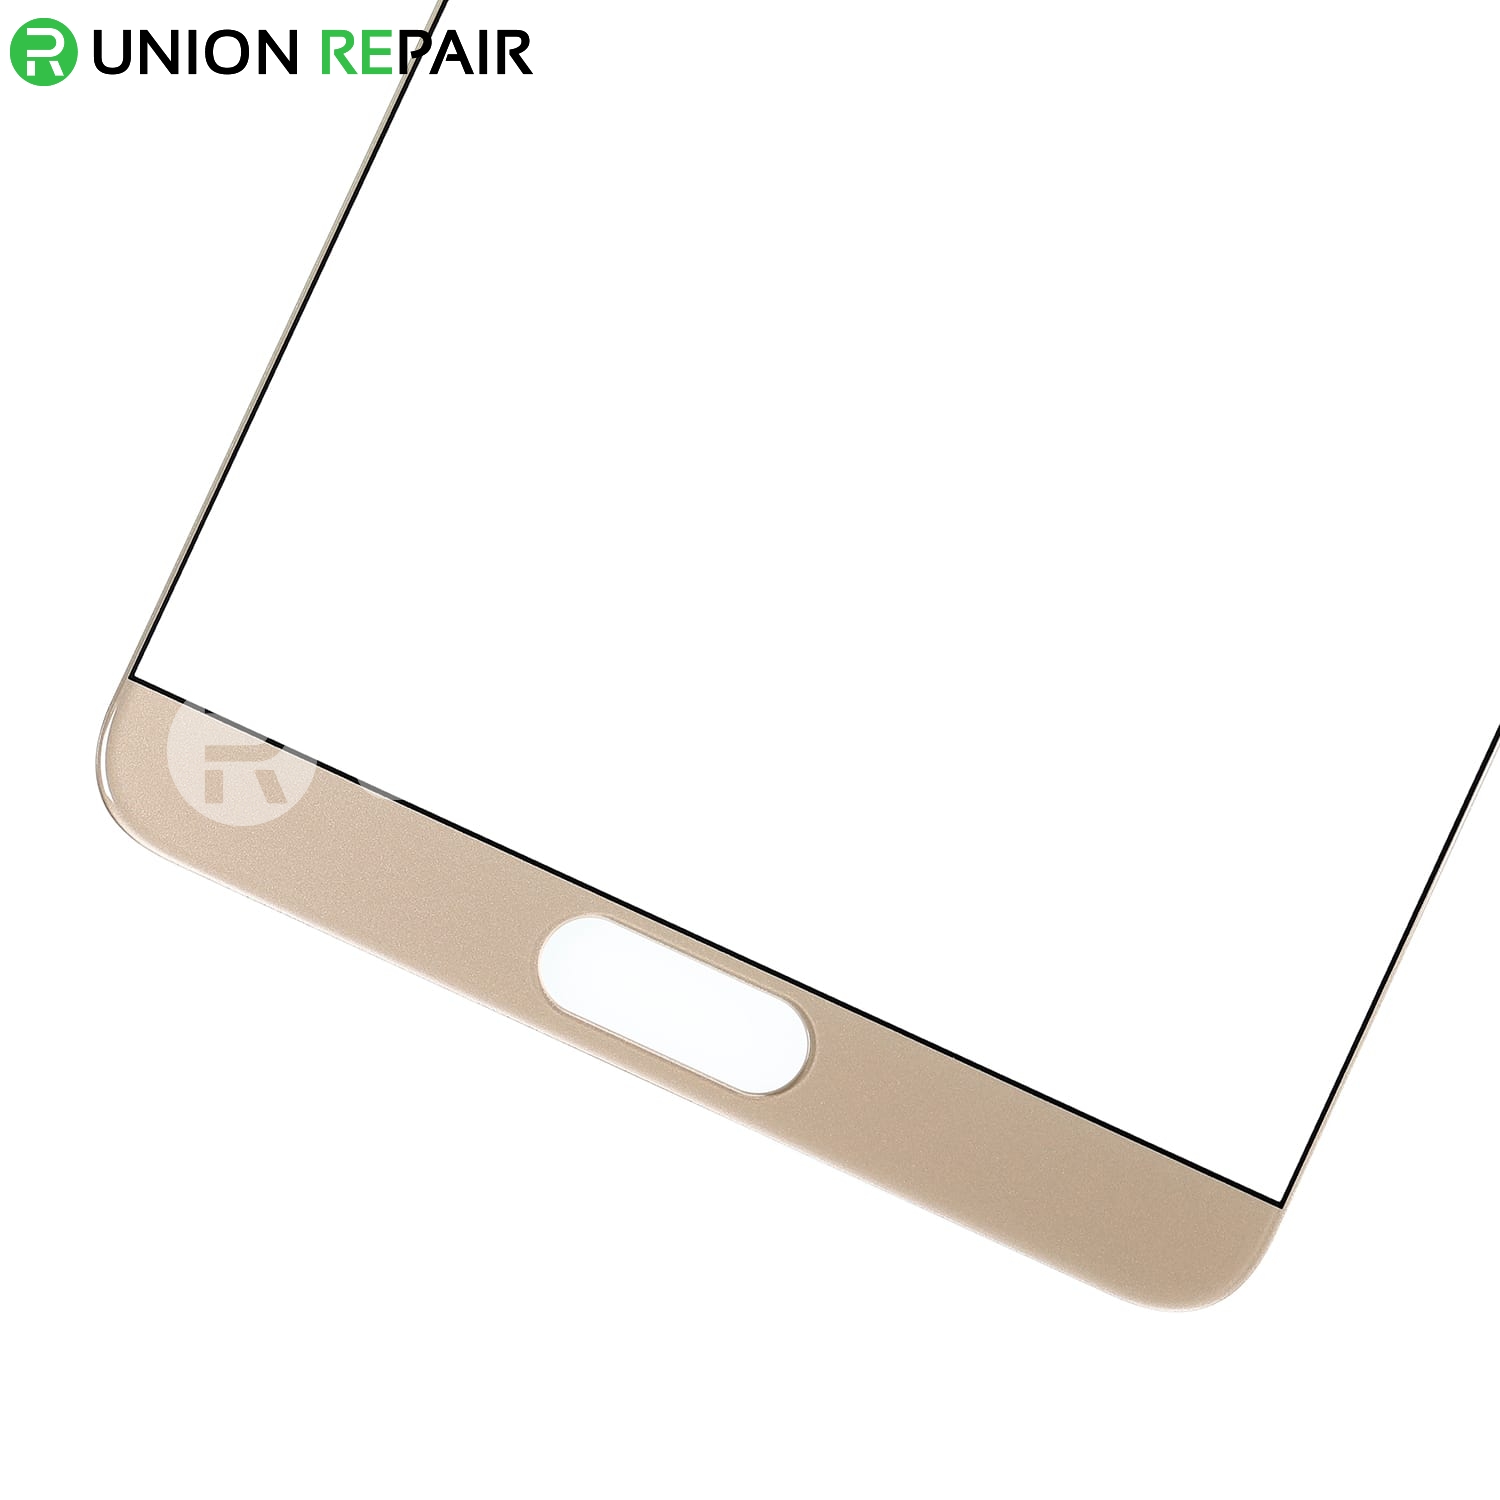 Replacement for Huawei Mate 10 Front Glass - Gold